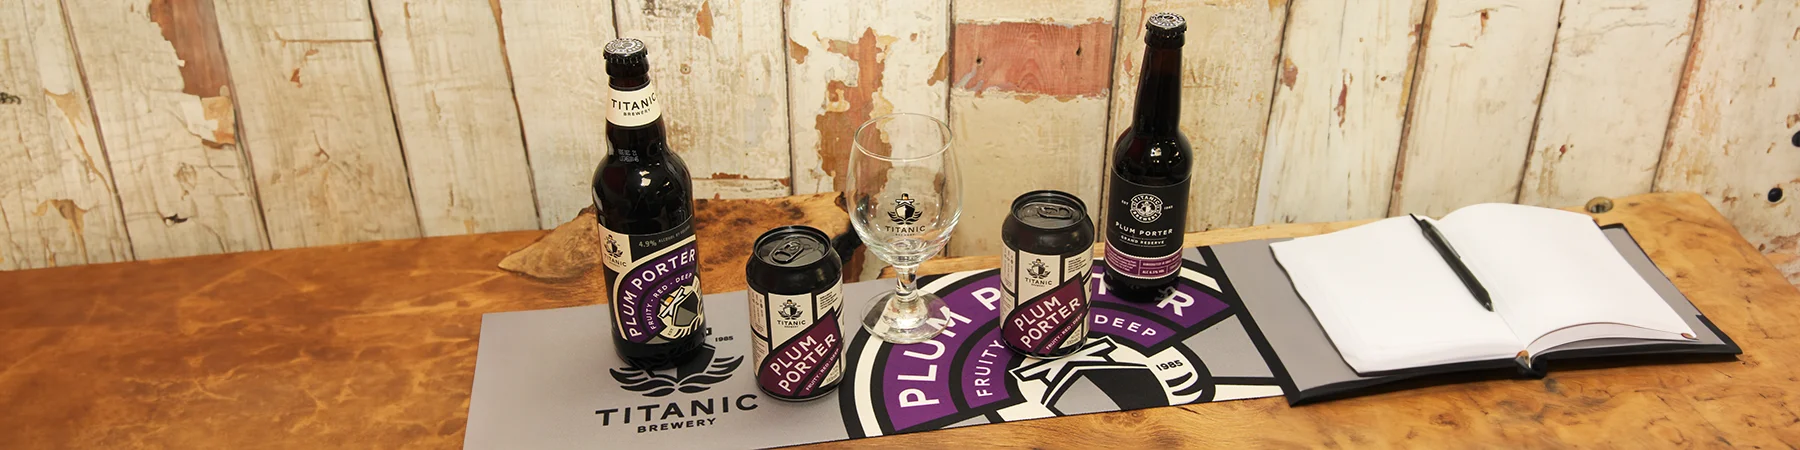 bottles and cans of titanic plum porter beers on logo runner next to book